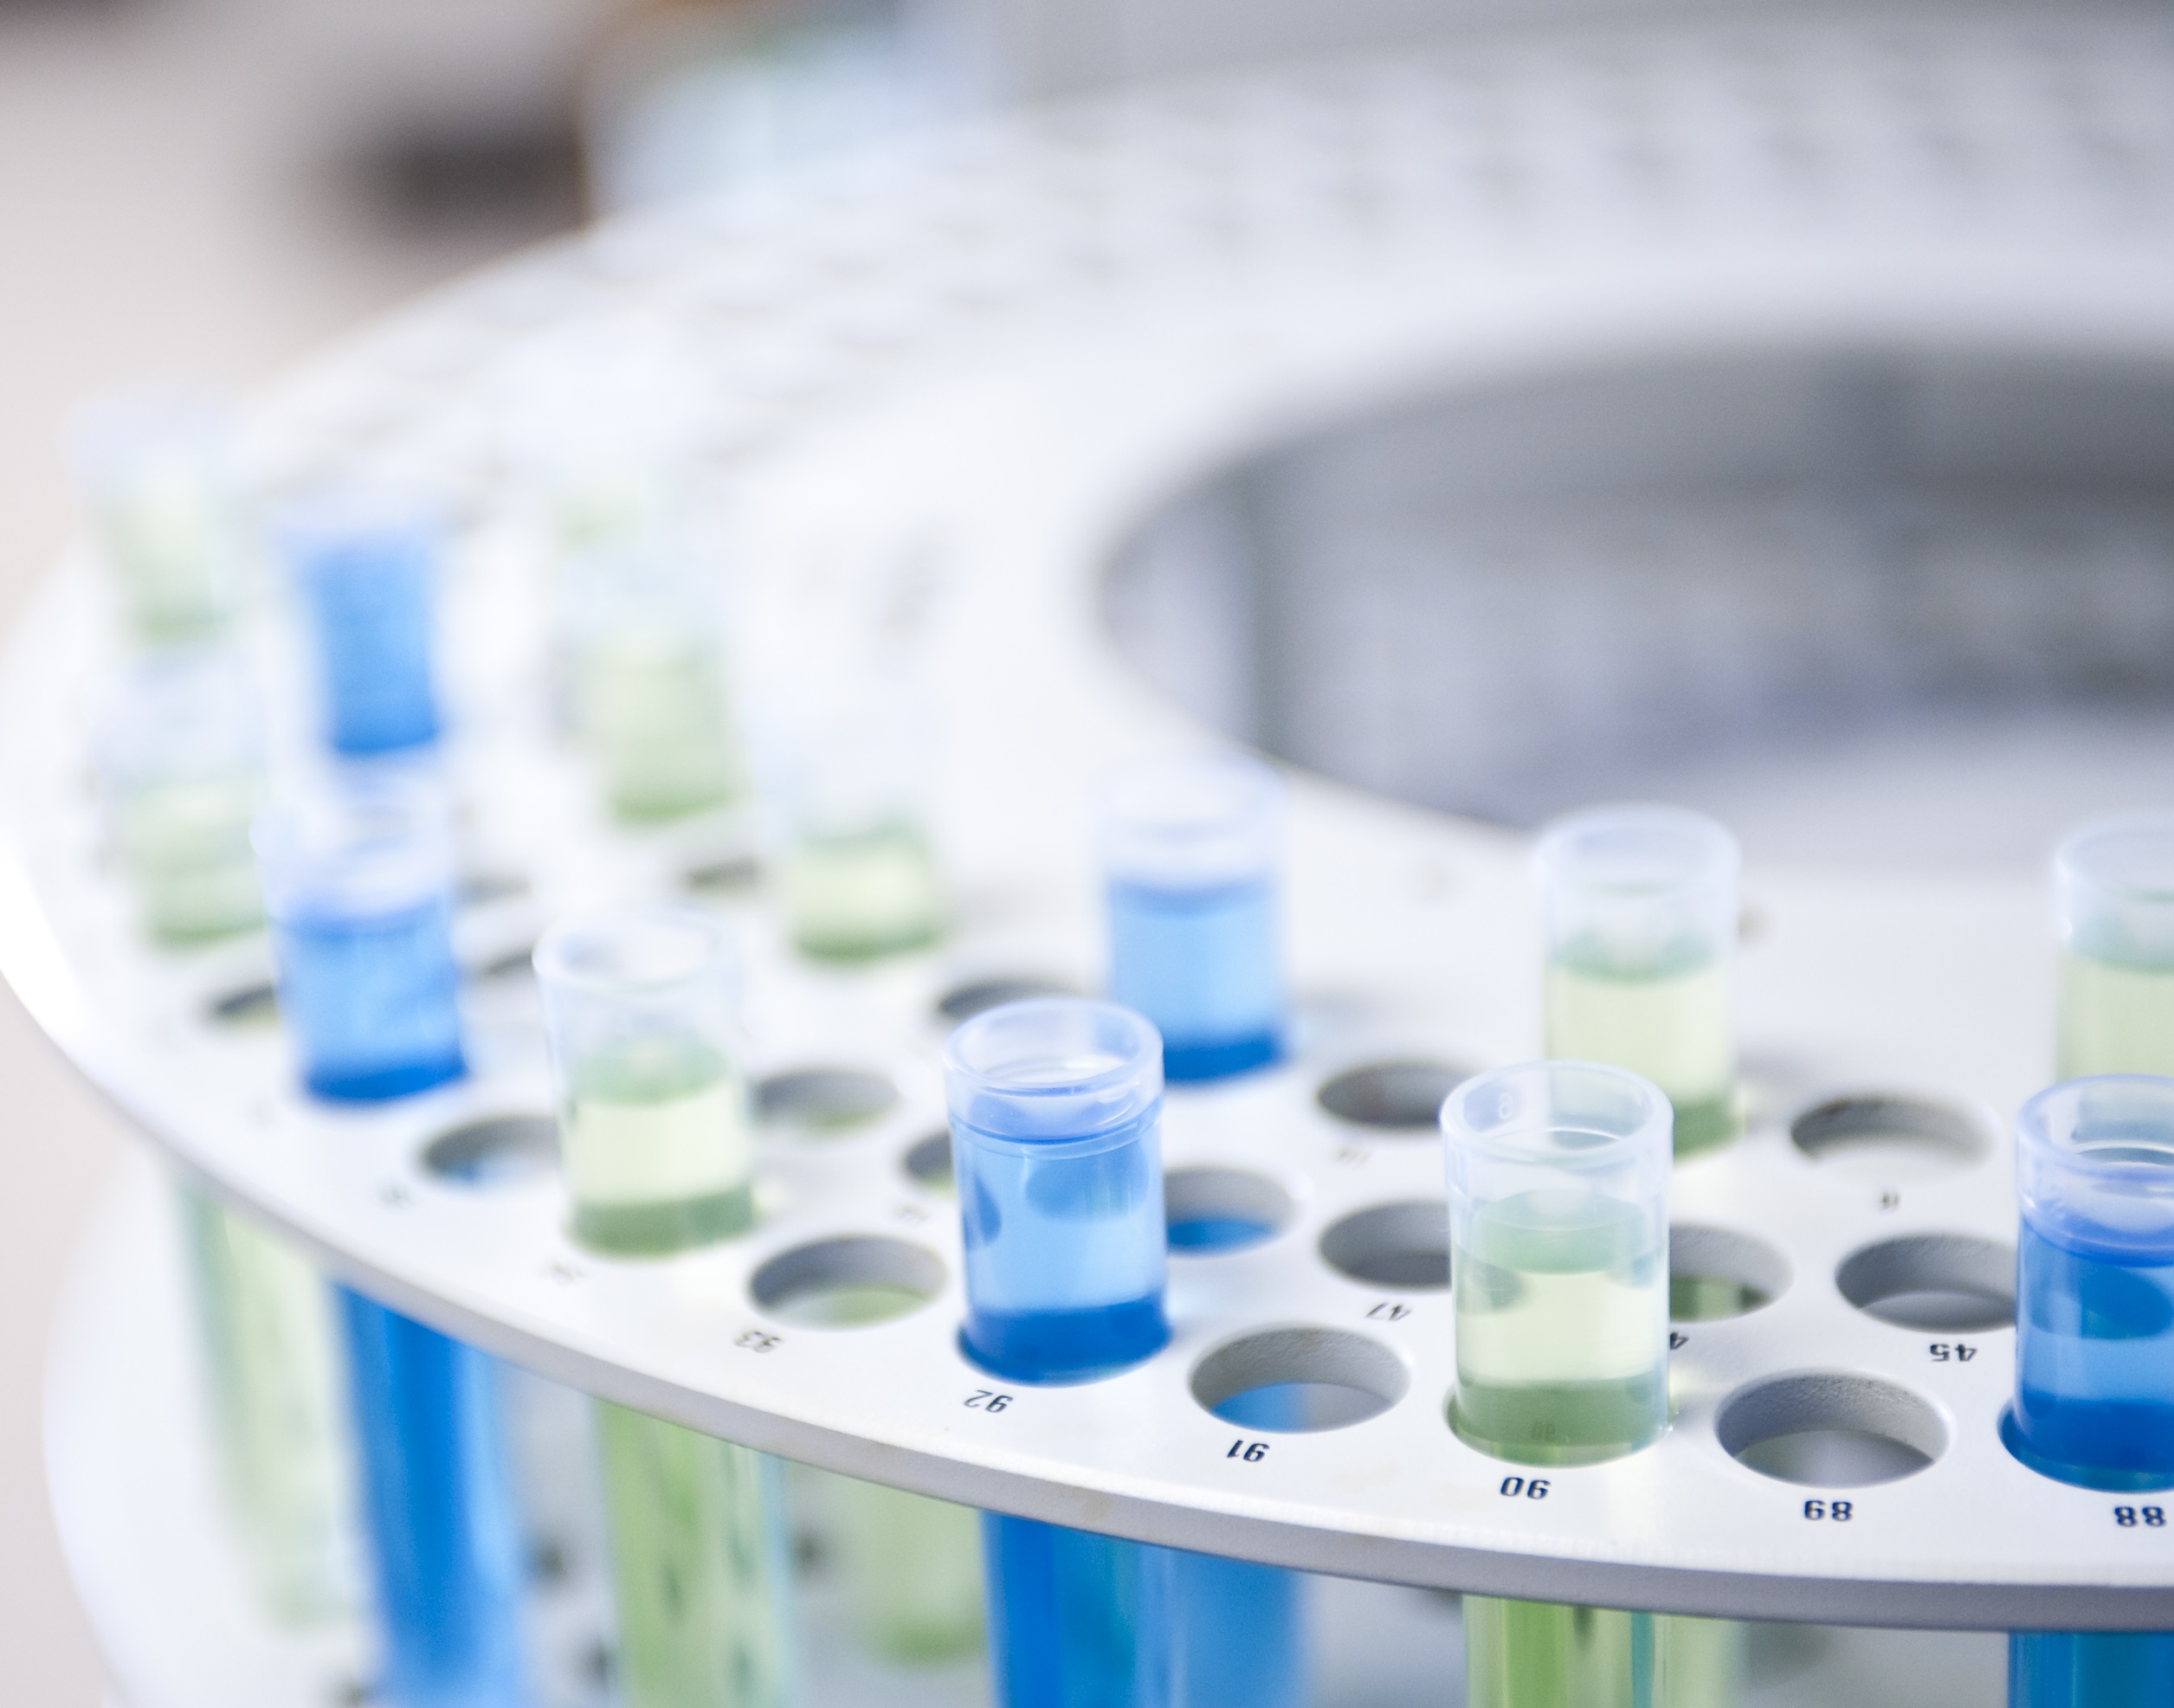 A close-up of test tubes with blue and green liquids in a circular holder, suggesting a scientific experiment or analysis.